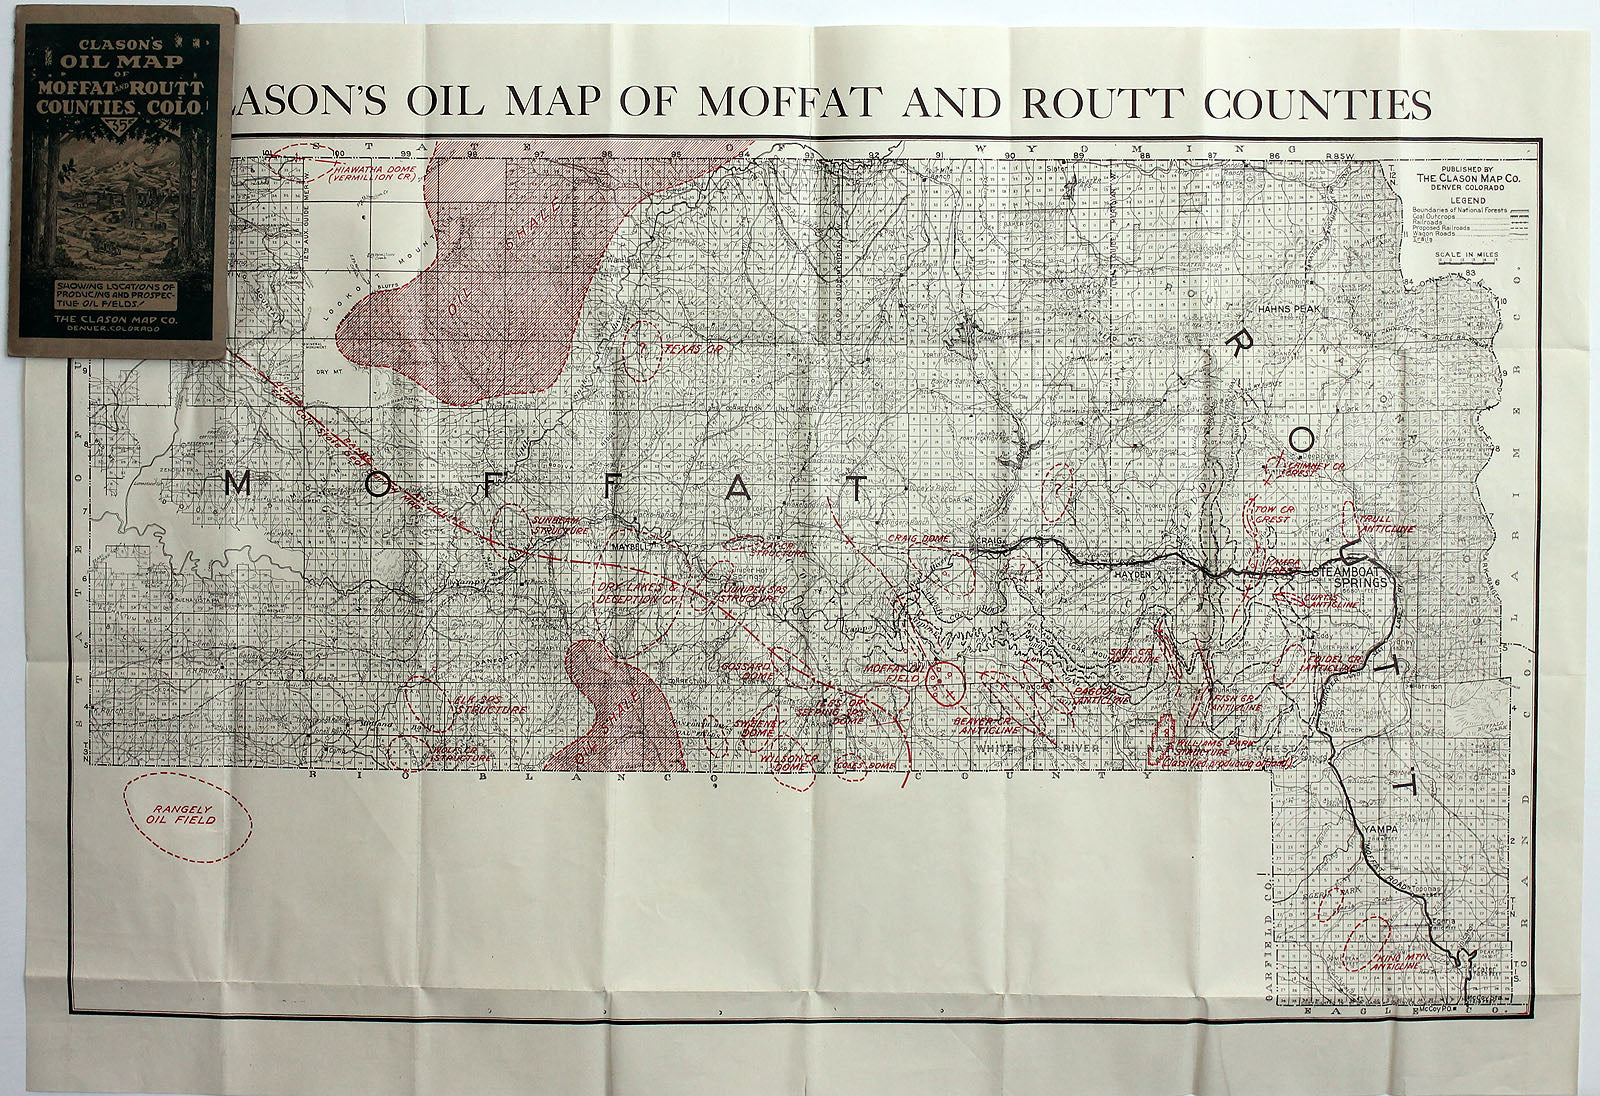 (CO. - Moffat, Routt Counties) Clason's Oil Map of